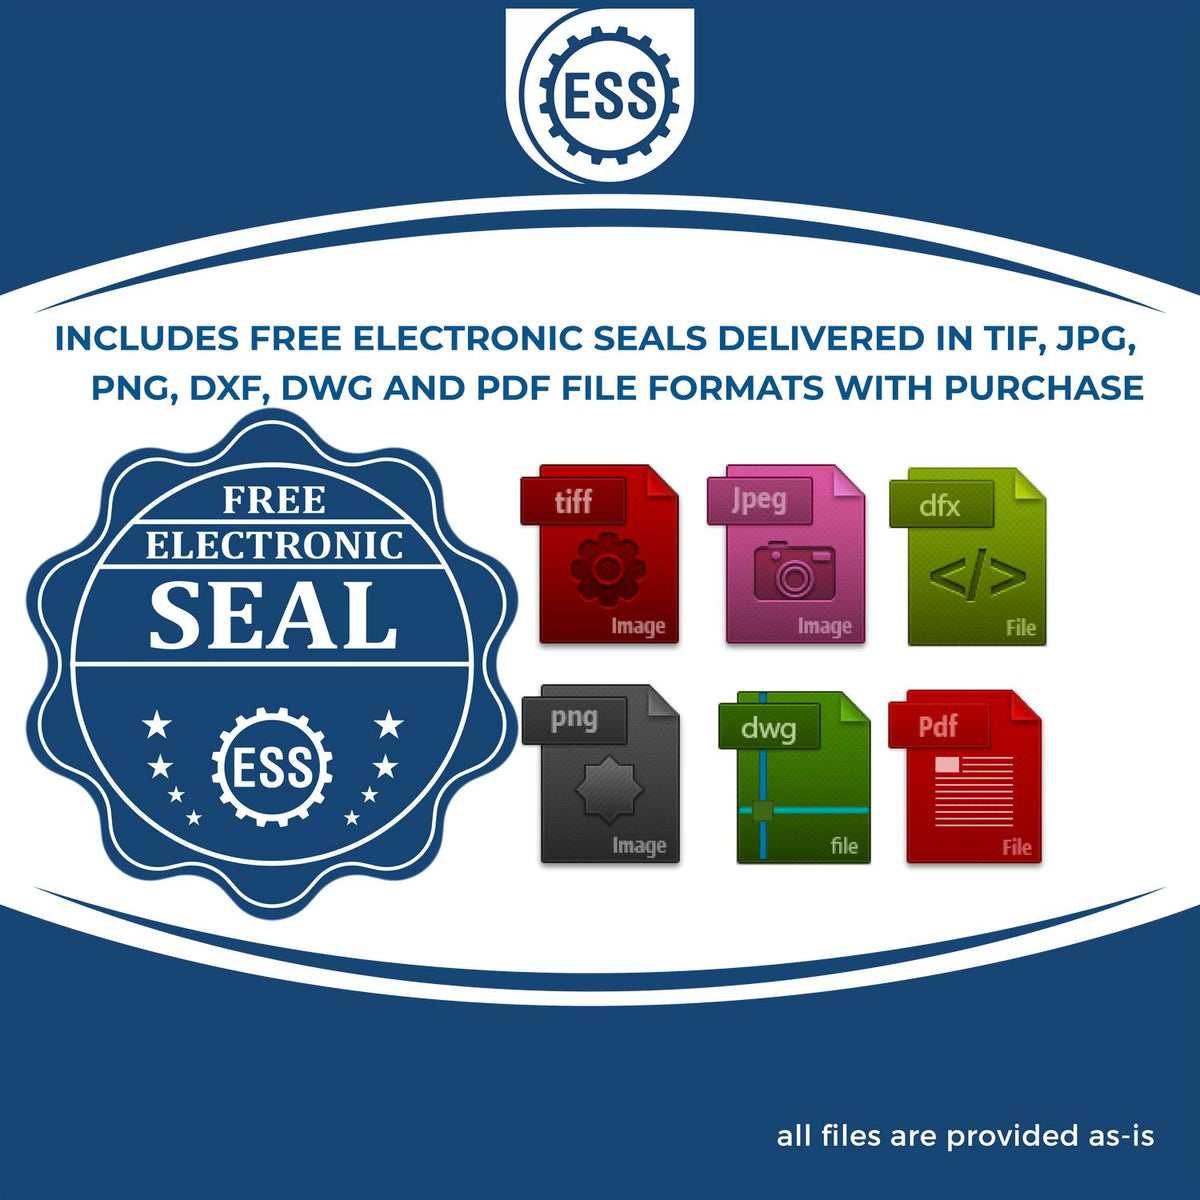 An infographic for the free electronic seal for the State of Virginia Extended Long Reach Engineer Seal illustrating the different file type icons such as DXF, DWG, TIF, JPG and PNG.